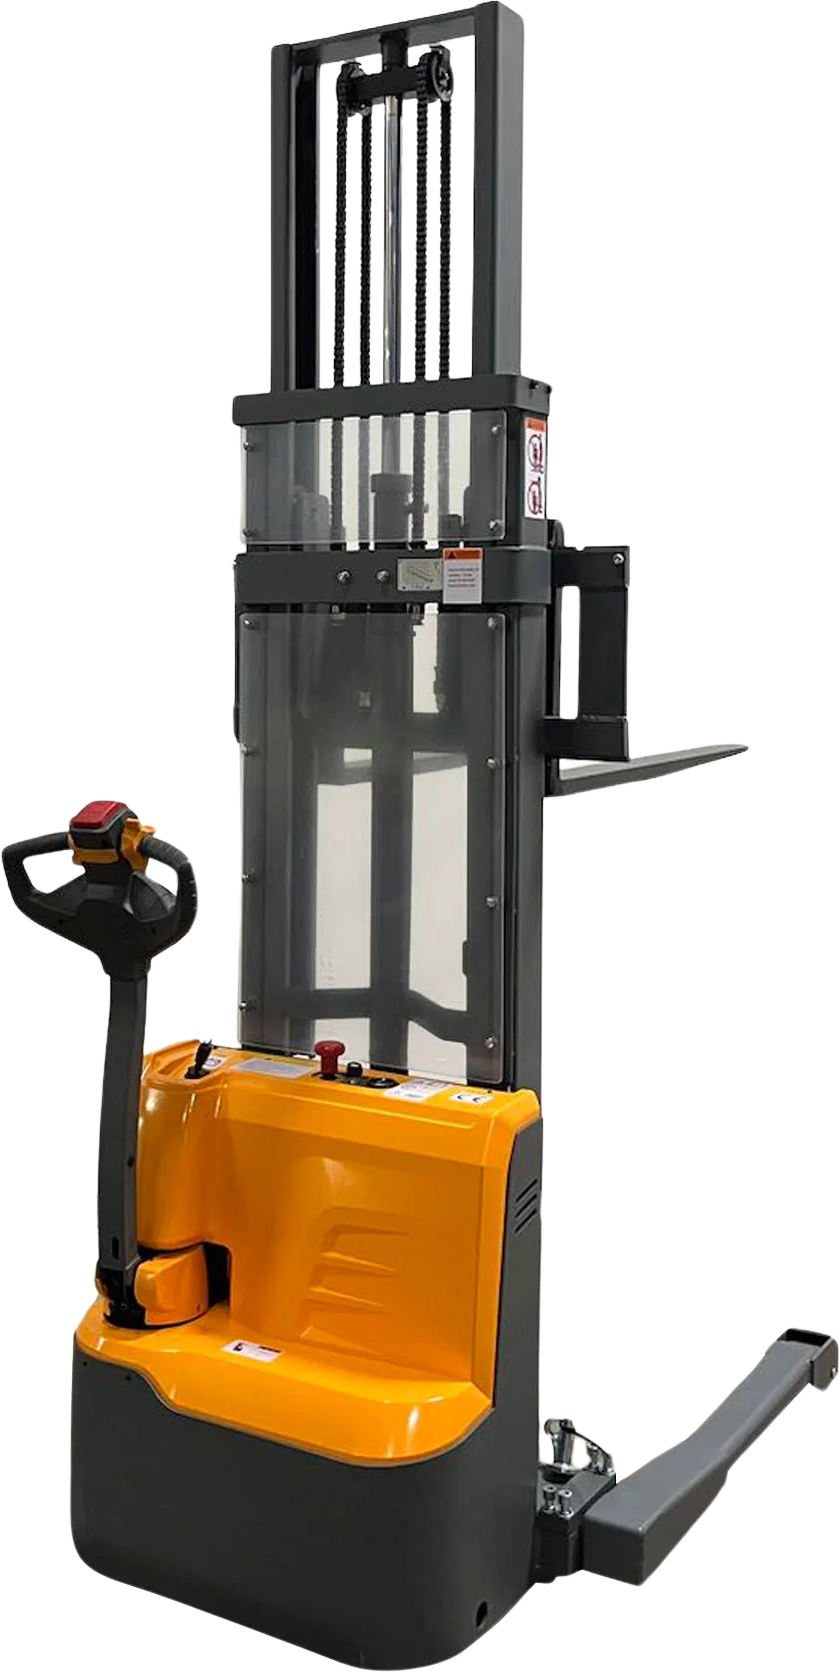 Apollolift A-3035 Electric Forklift Walkie Stacker Lithium Battery with Straddle Legs 2640 lbs. Capacity 118